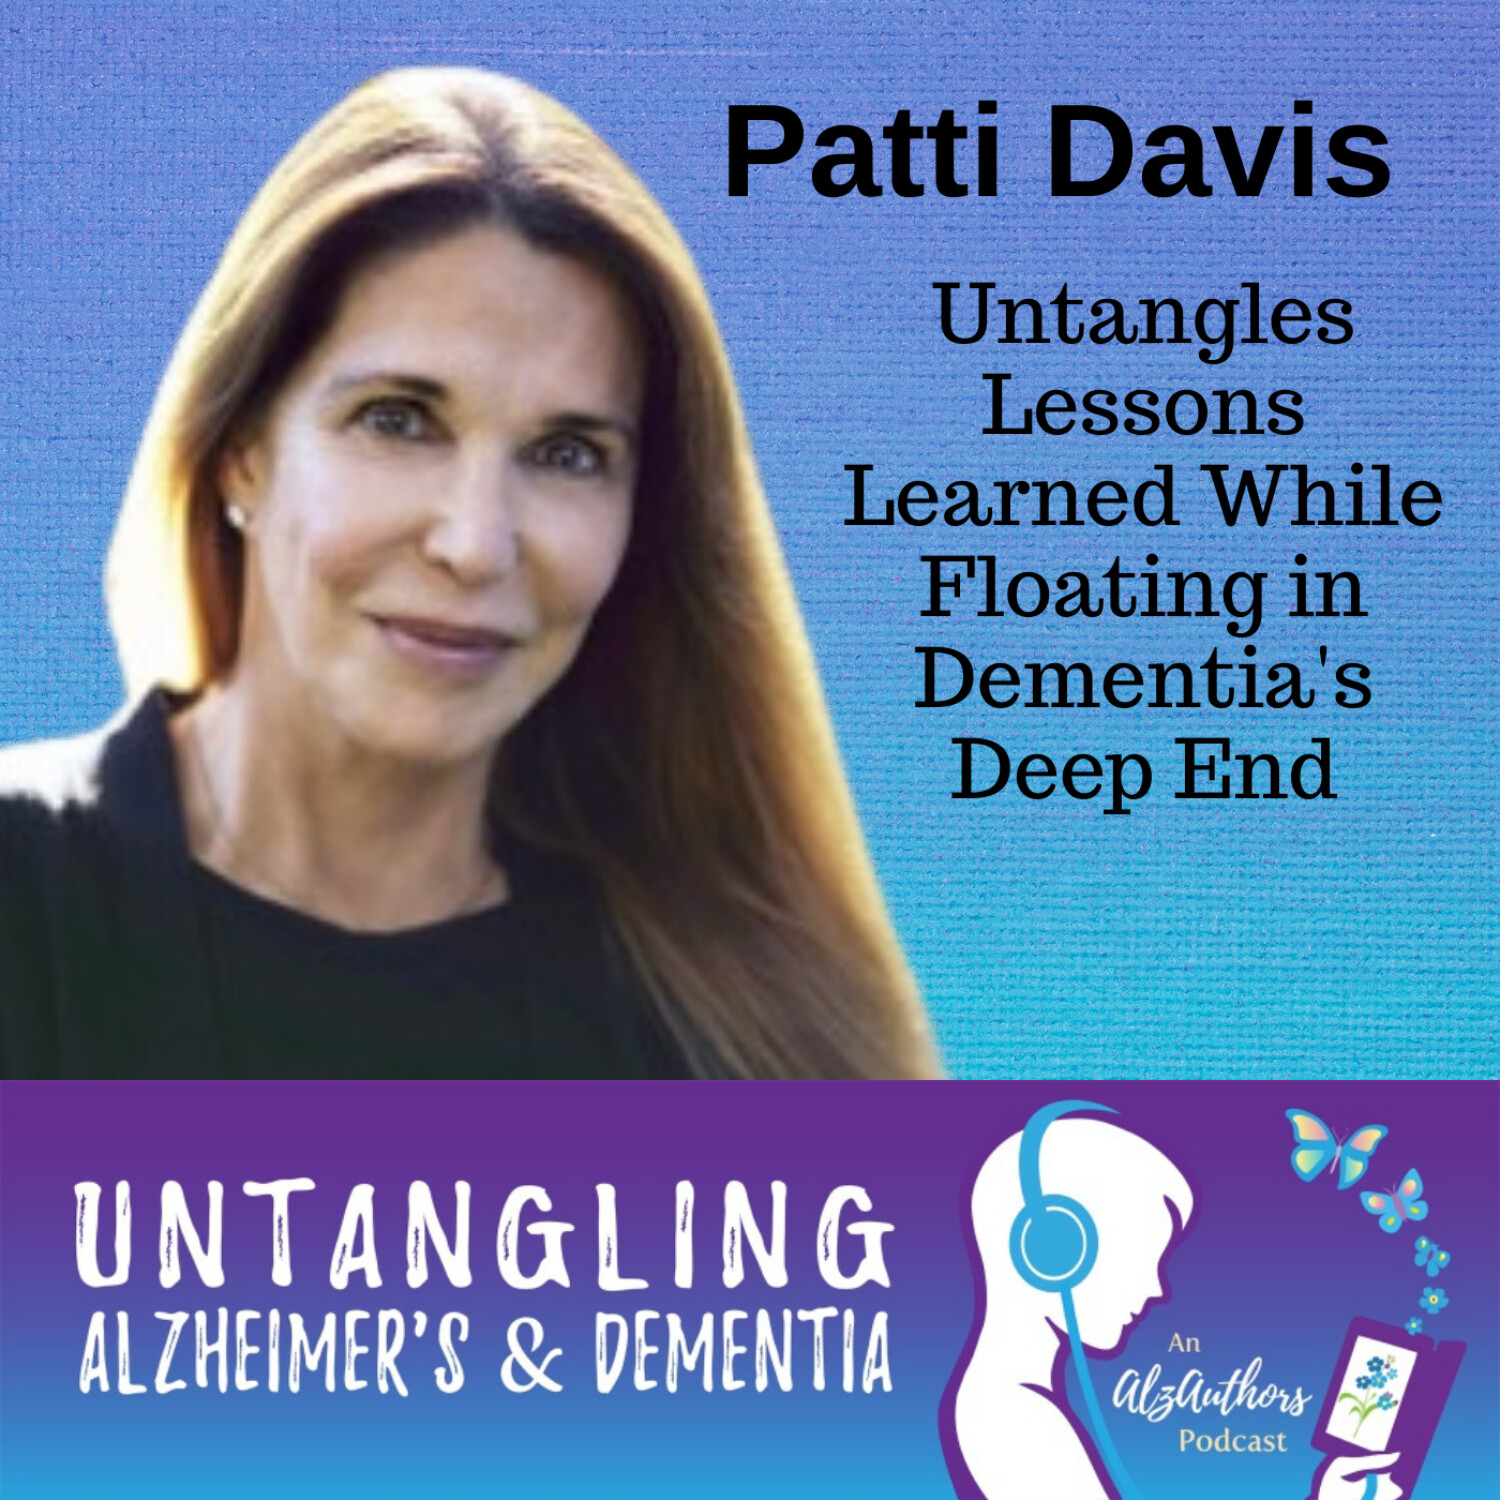 Patti Davis Untangles Lessons Learned While Floating in Dementia's Deep End